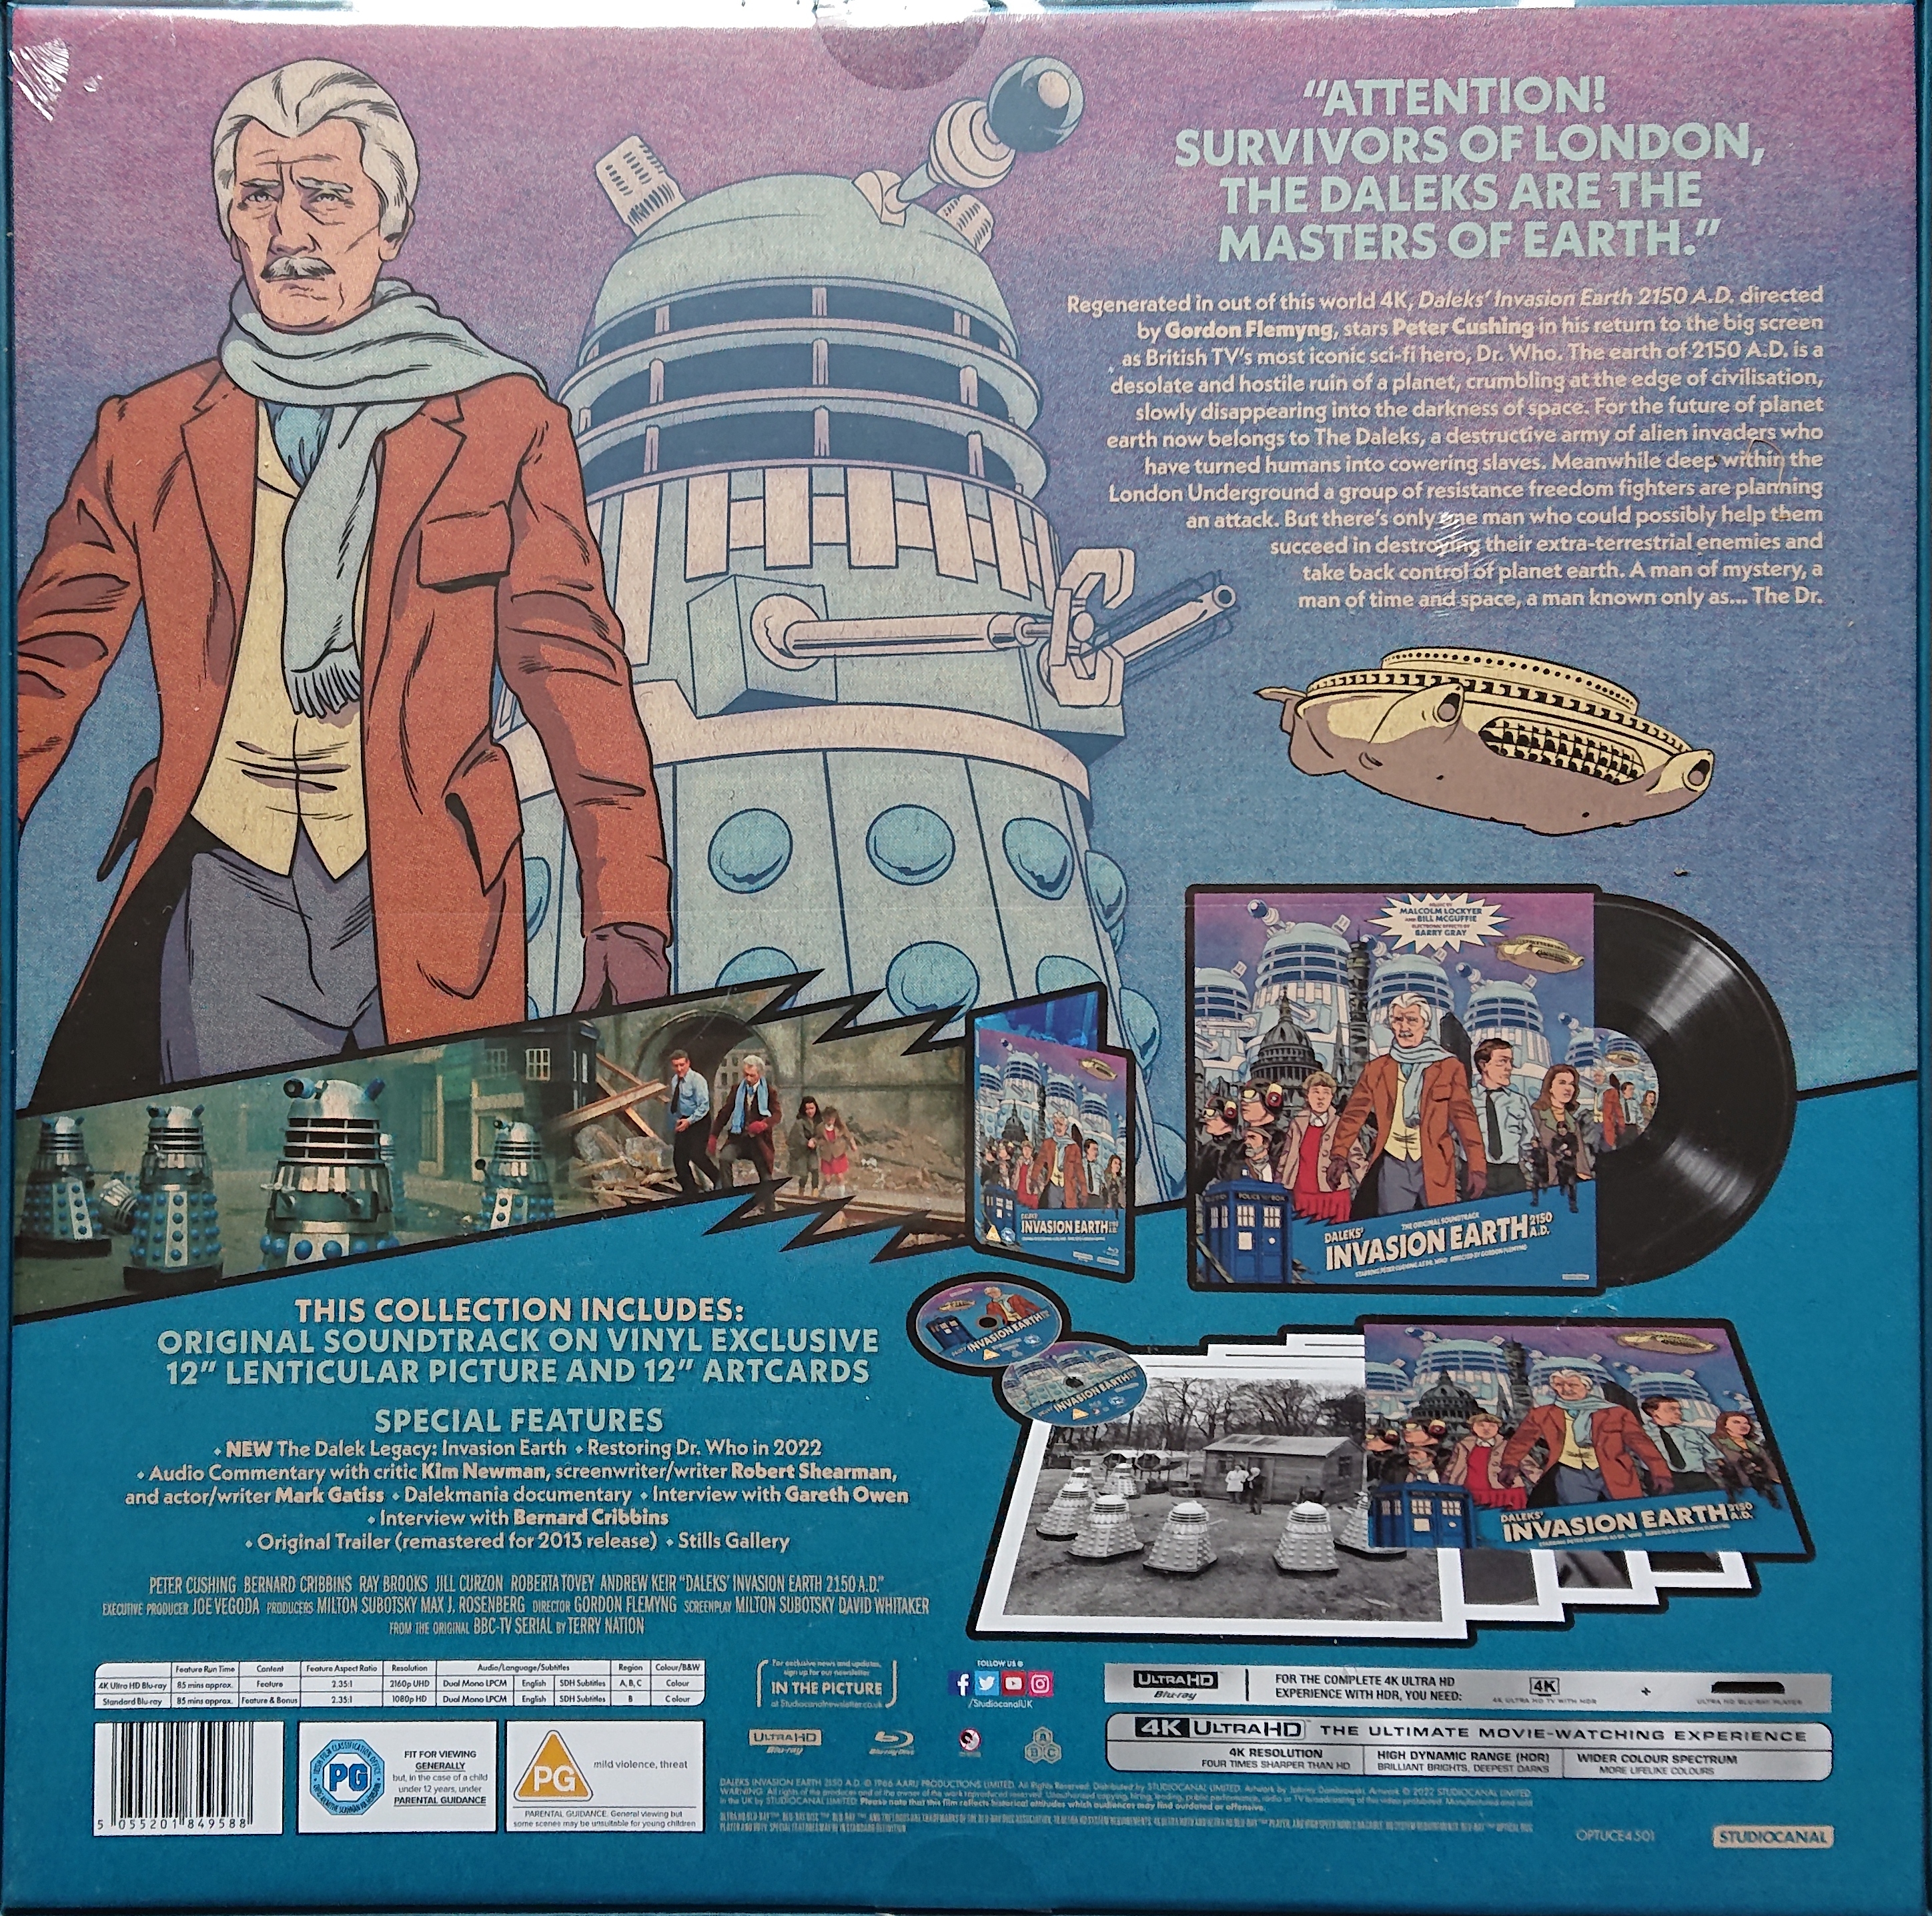 Picture of OPTUCE 4501 Dr. Who Daleks' invasion Earth 2150AD by artist Terry Nation / Milton Subotsky from the BBC records and Tapes library